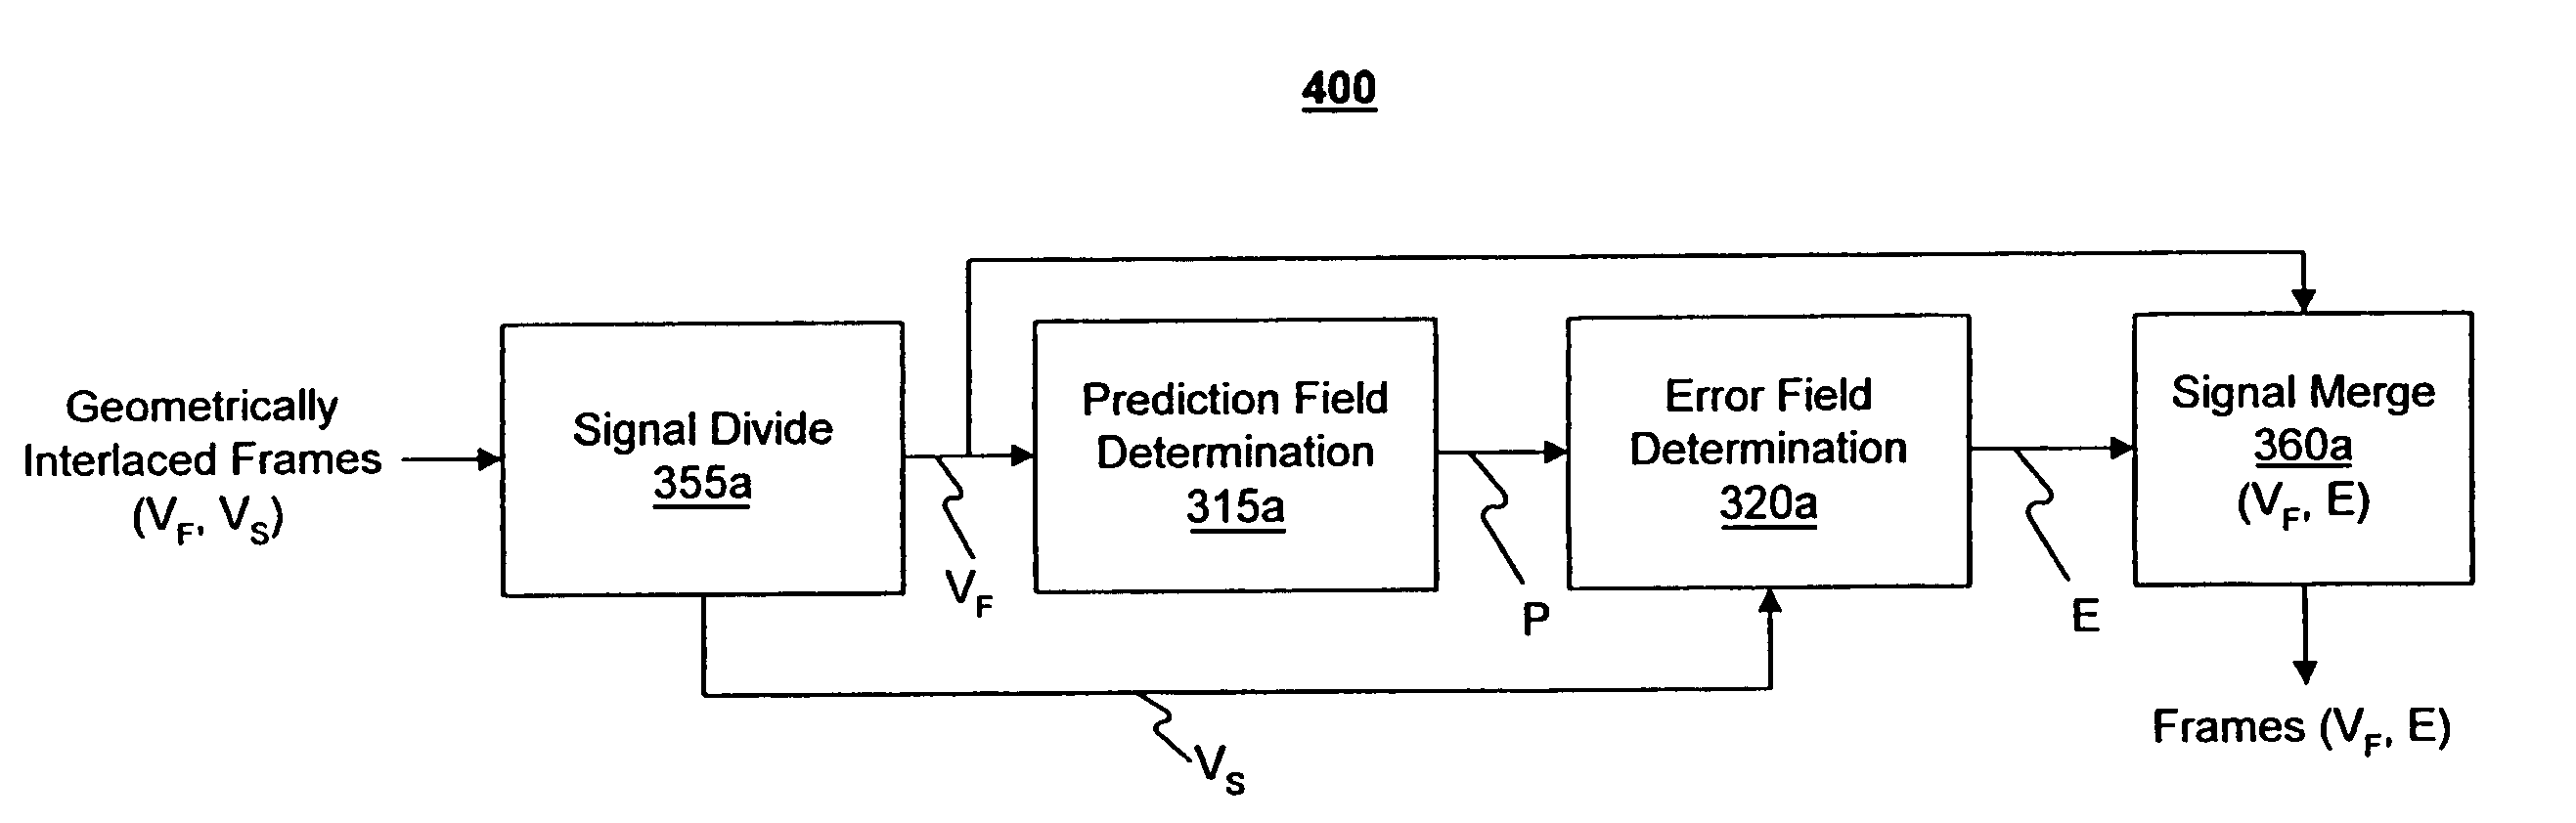 Apparatus and method for improved interlace processing